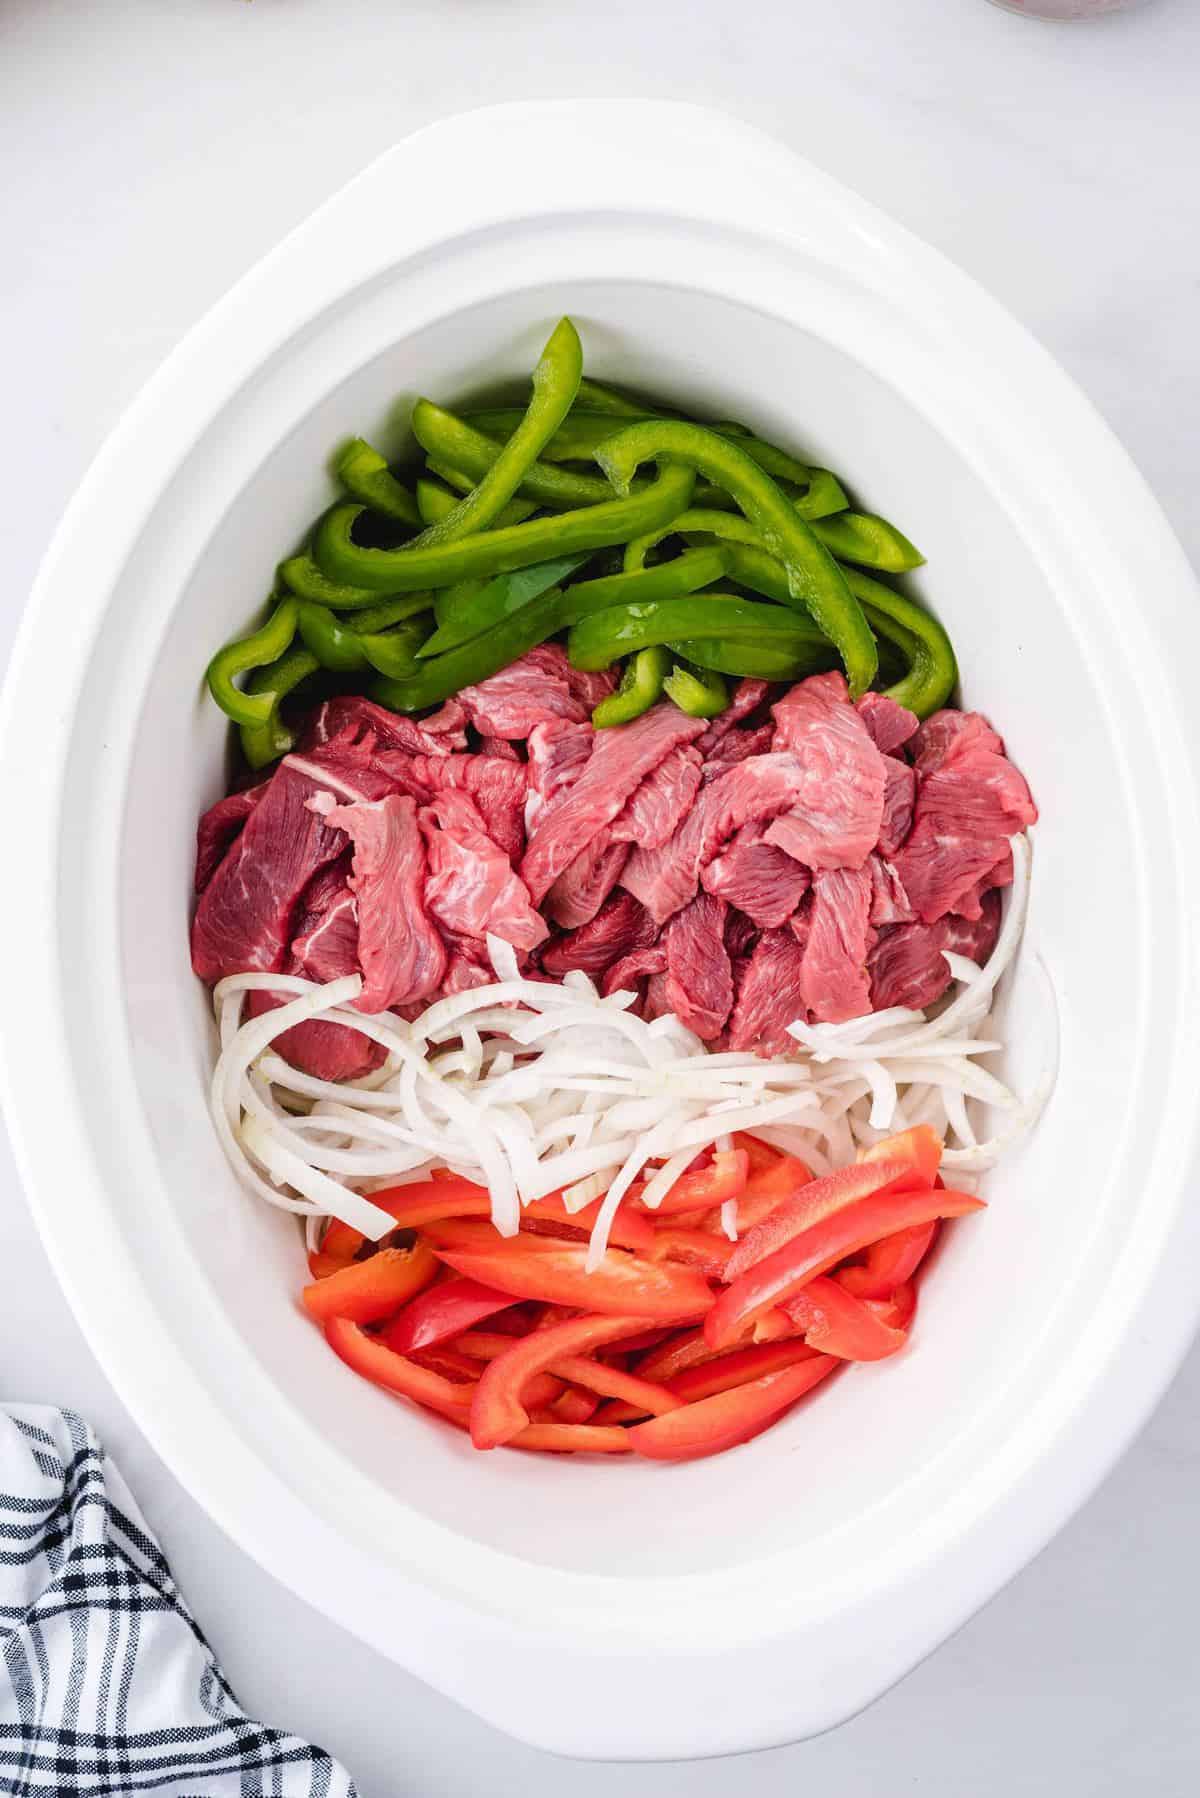 Add beef strips, red and green peppers, and onions to the Crockpot.